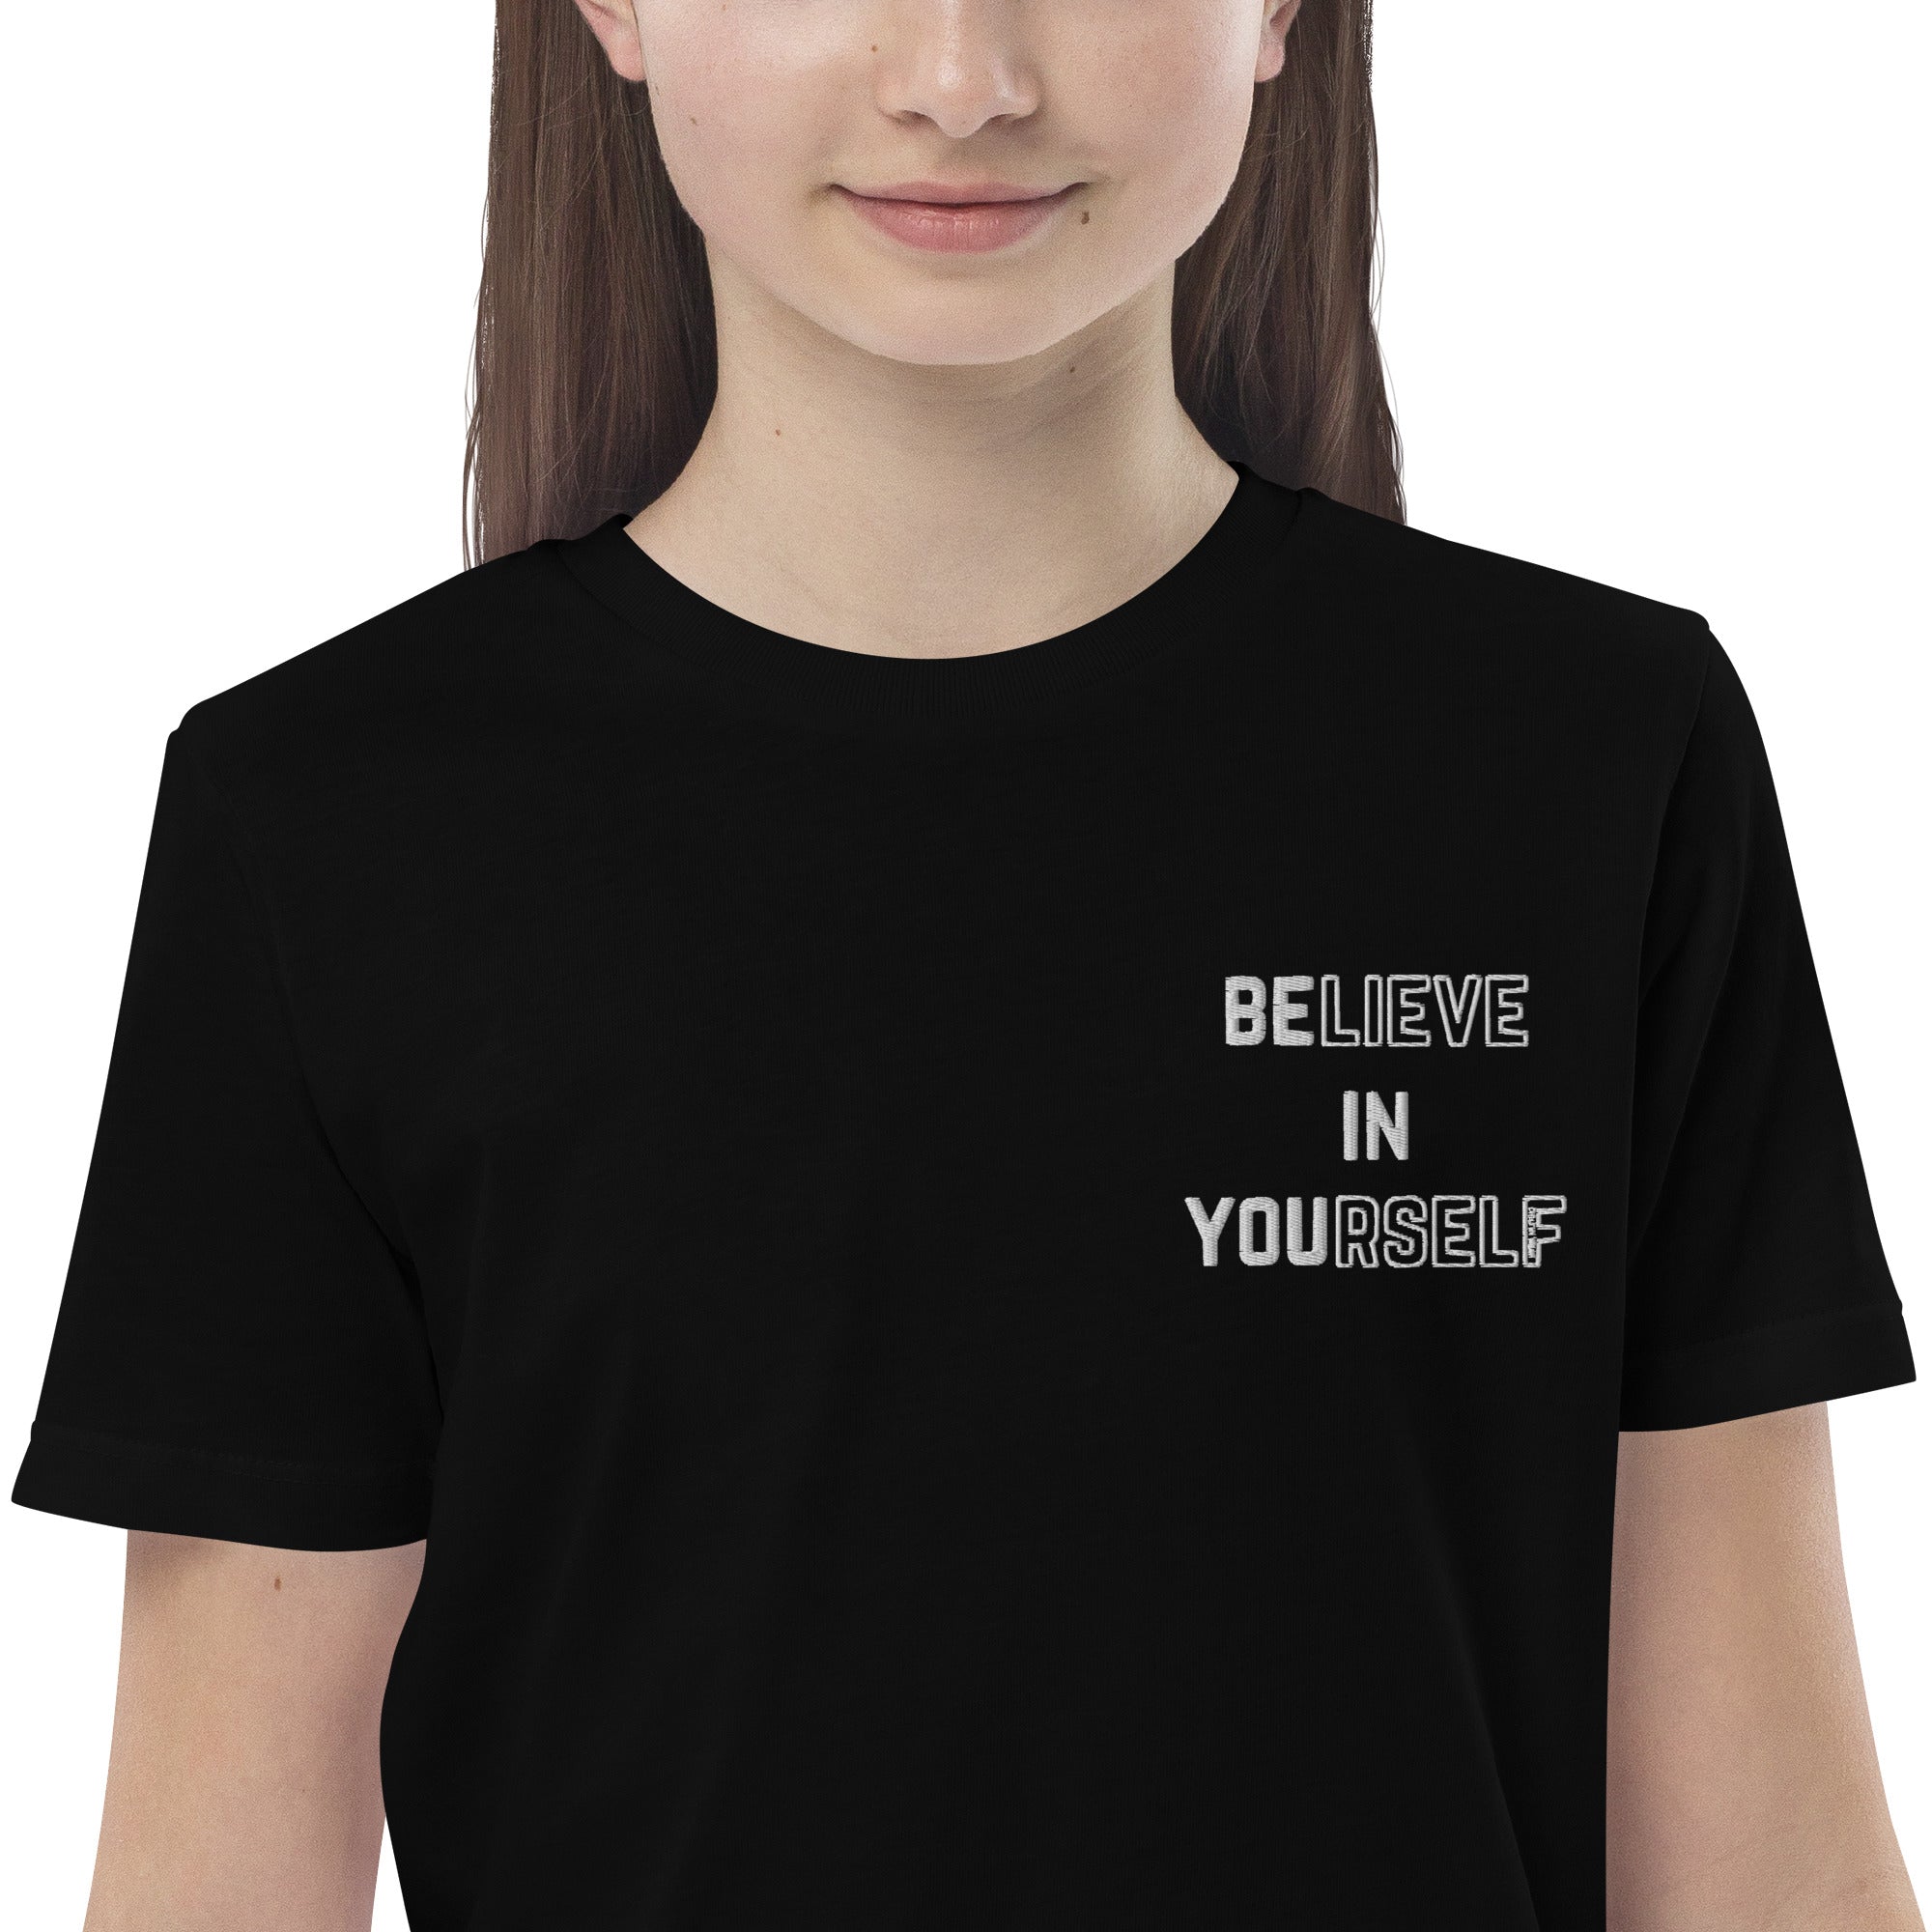 BELIEVE IN YOURSELF / BE YOU EMBROIDERED ORGANIC CHILDREN&